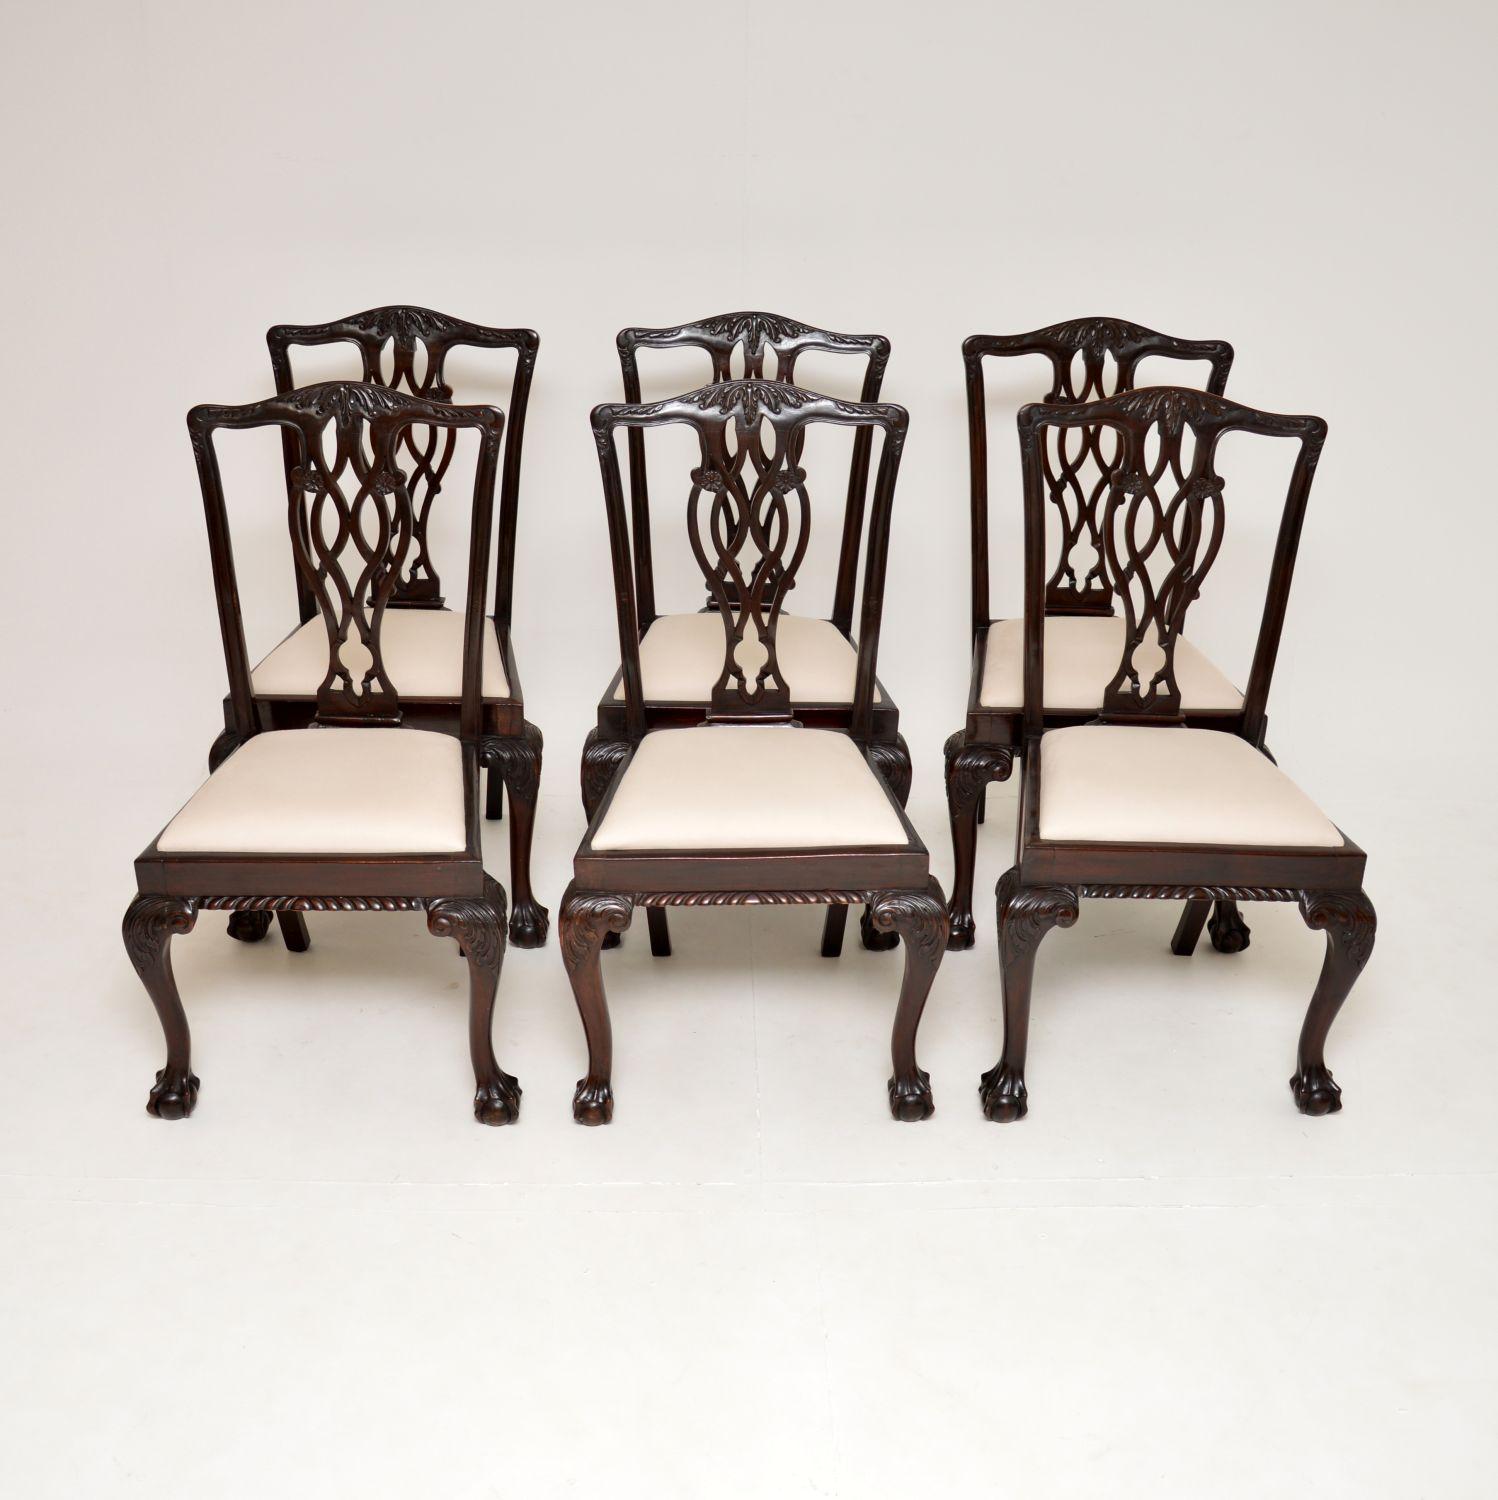 history of chippendale furniture